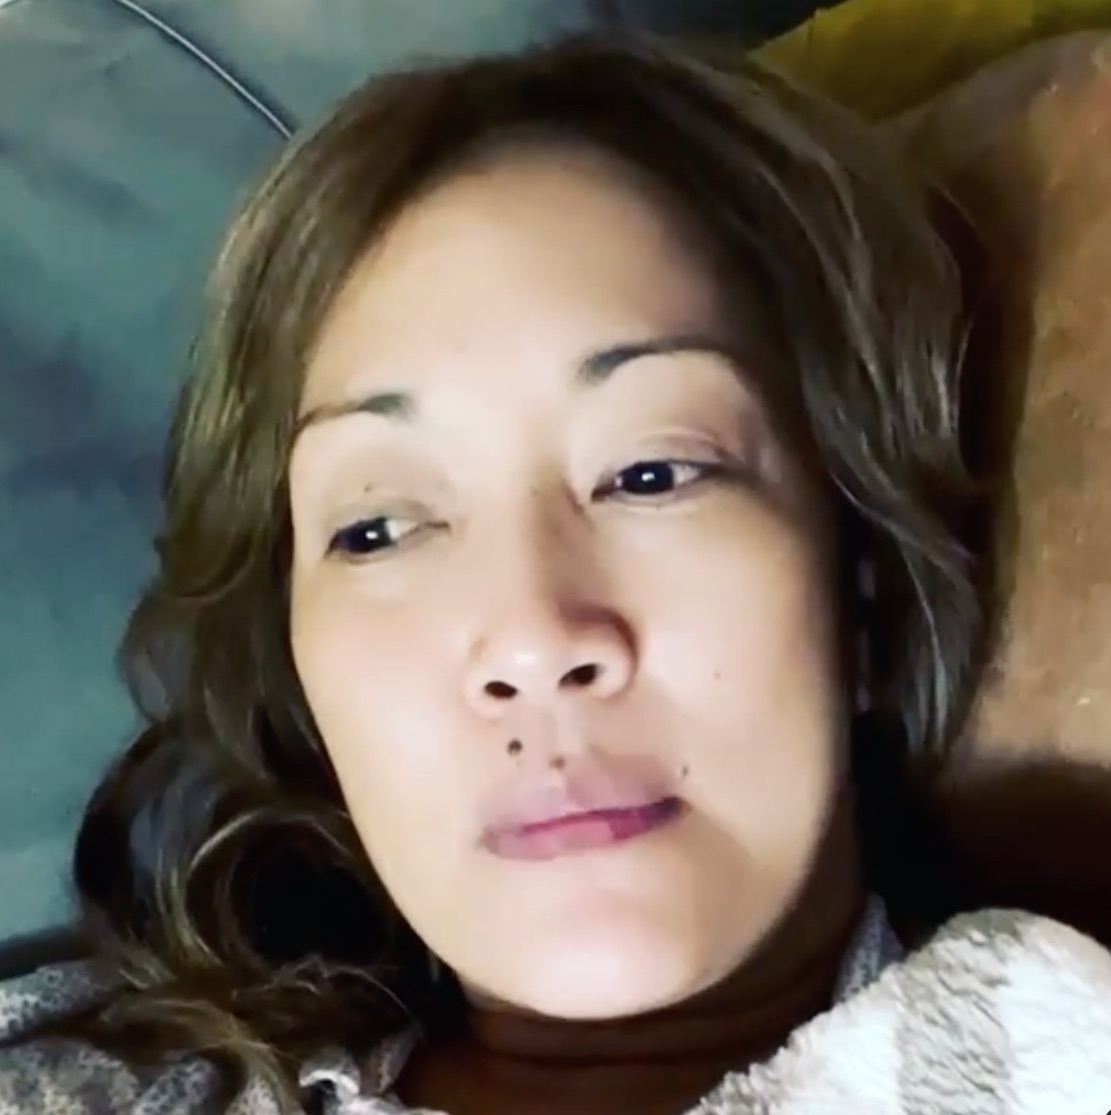 Carrie Ann Inaba Instagram video